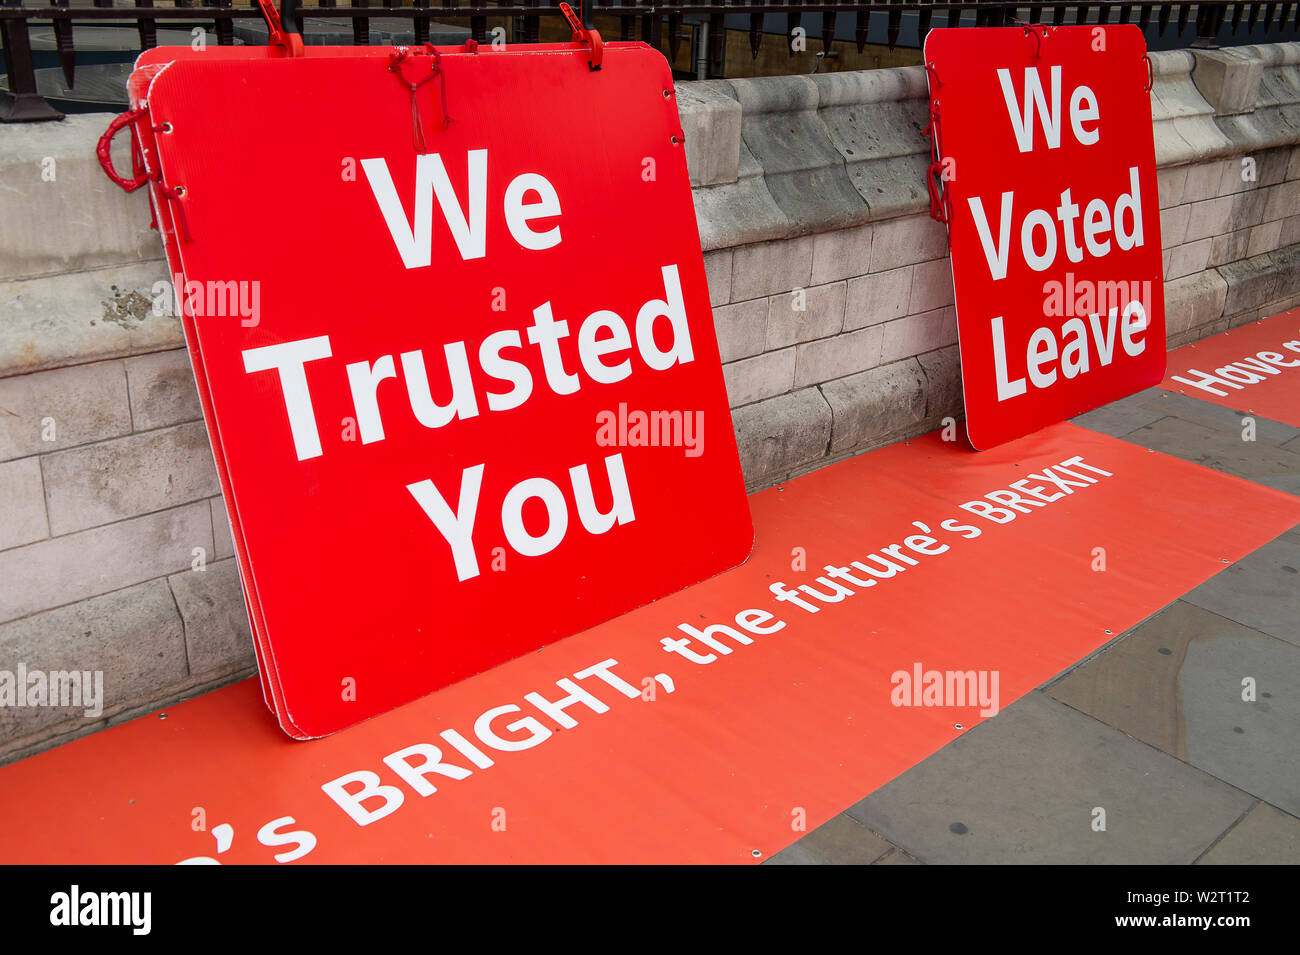 Pro Brexit Campaign, Westminister, London. 9th July, 2019. Pro Brexit red campaign signs leaning against the walls of the Palace of Westminister. Credit: Maureen McLean/Alamy Stock Photo